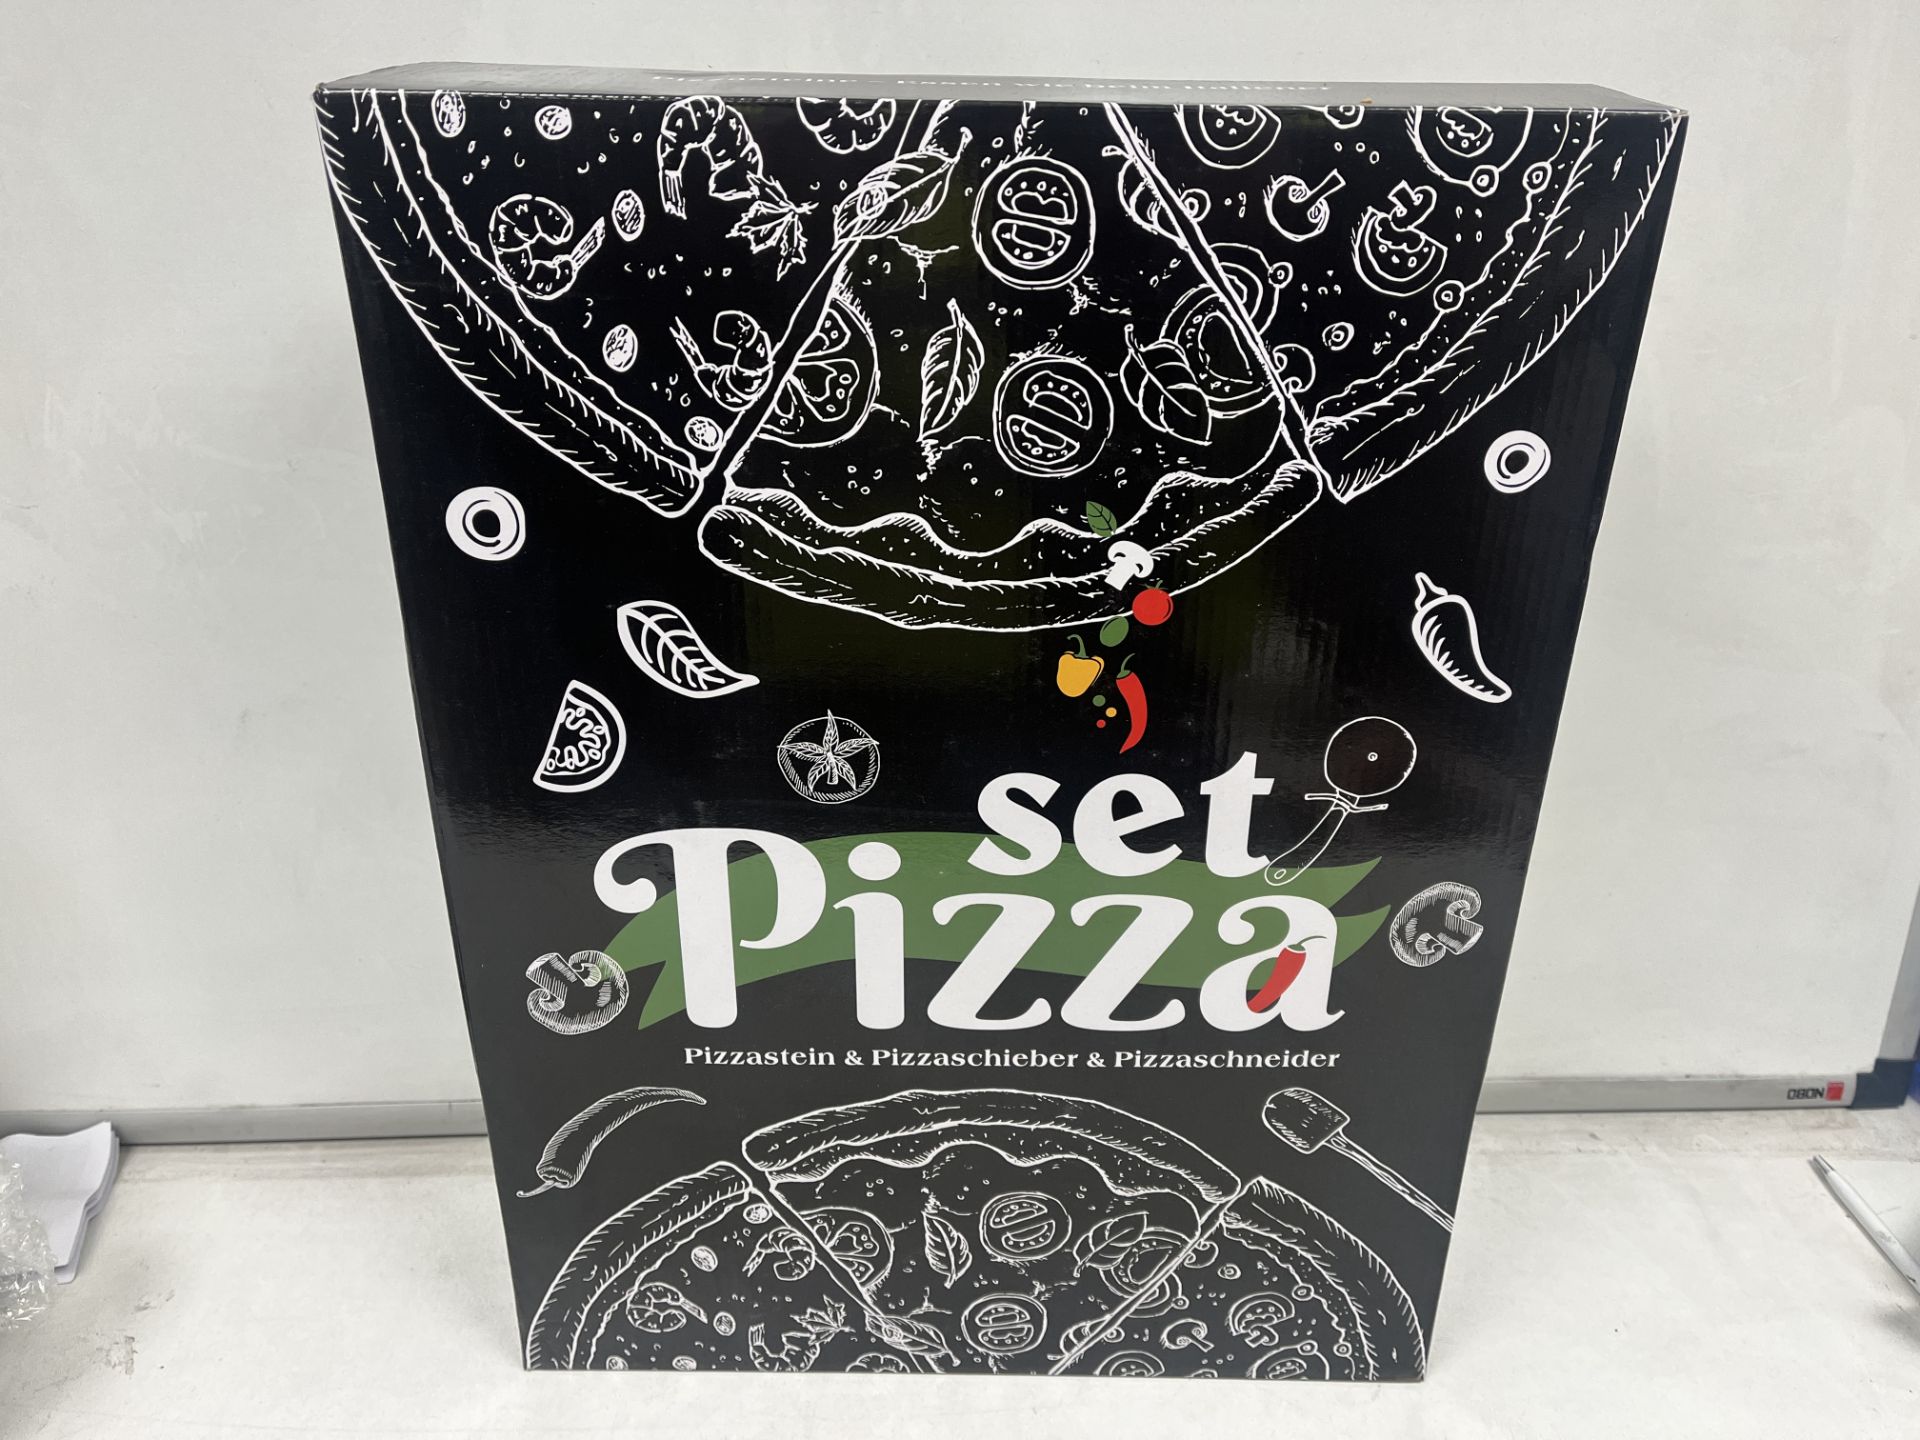 8 X BRAND NEW LARGE PIZZA STONE SETS RRP £40 EACH S1P